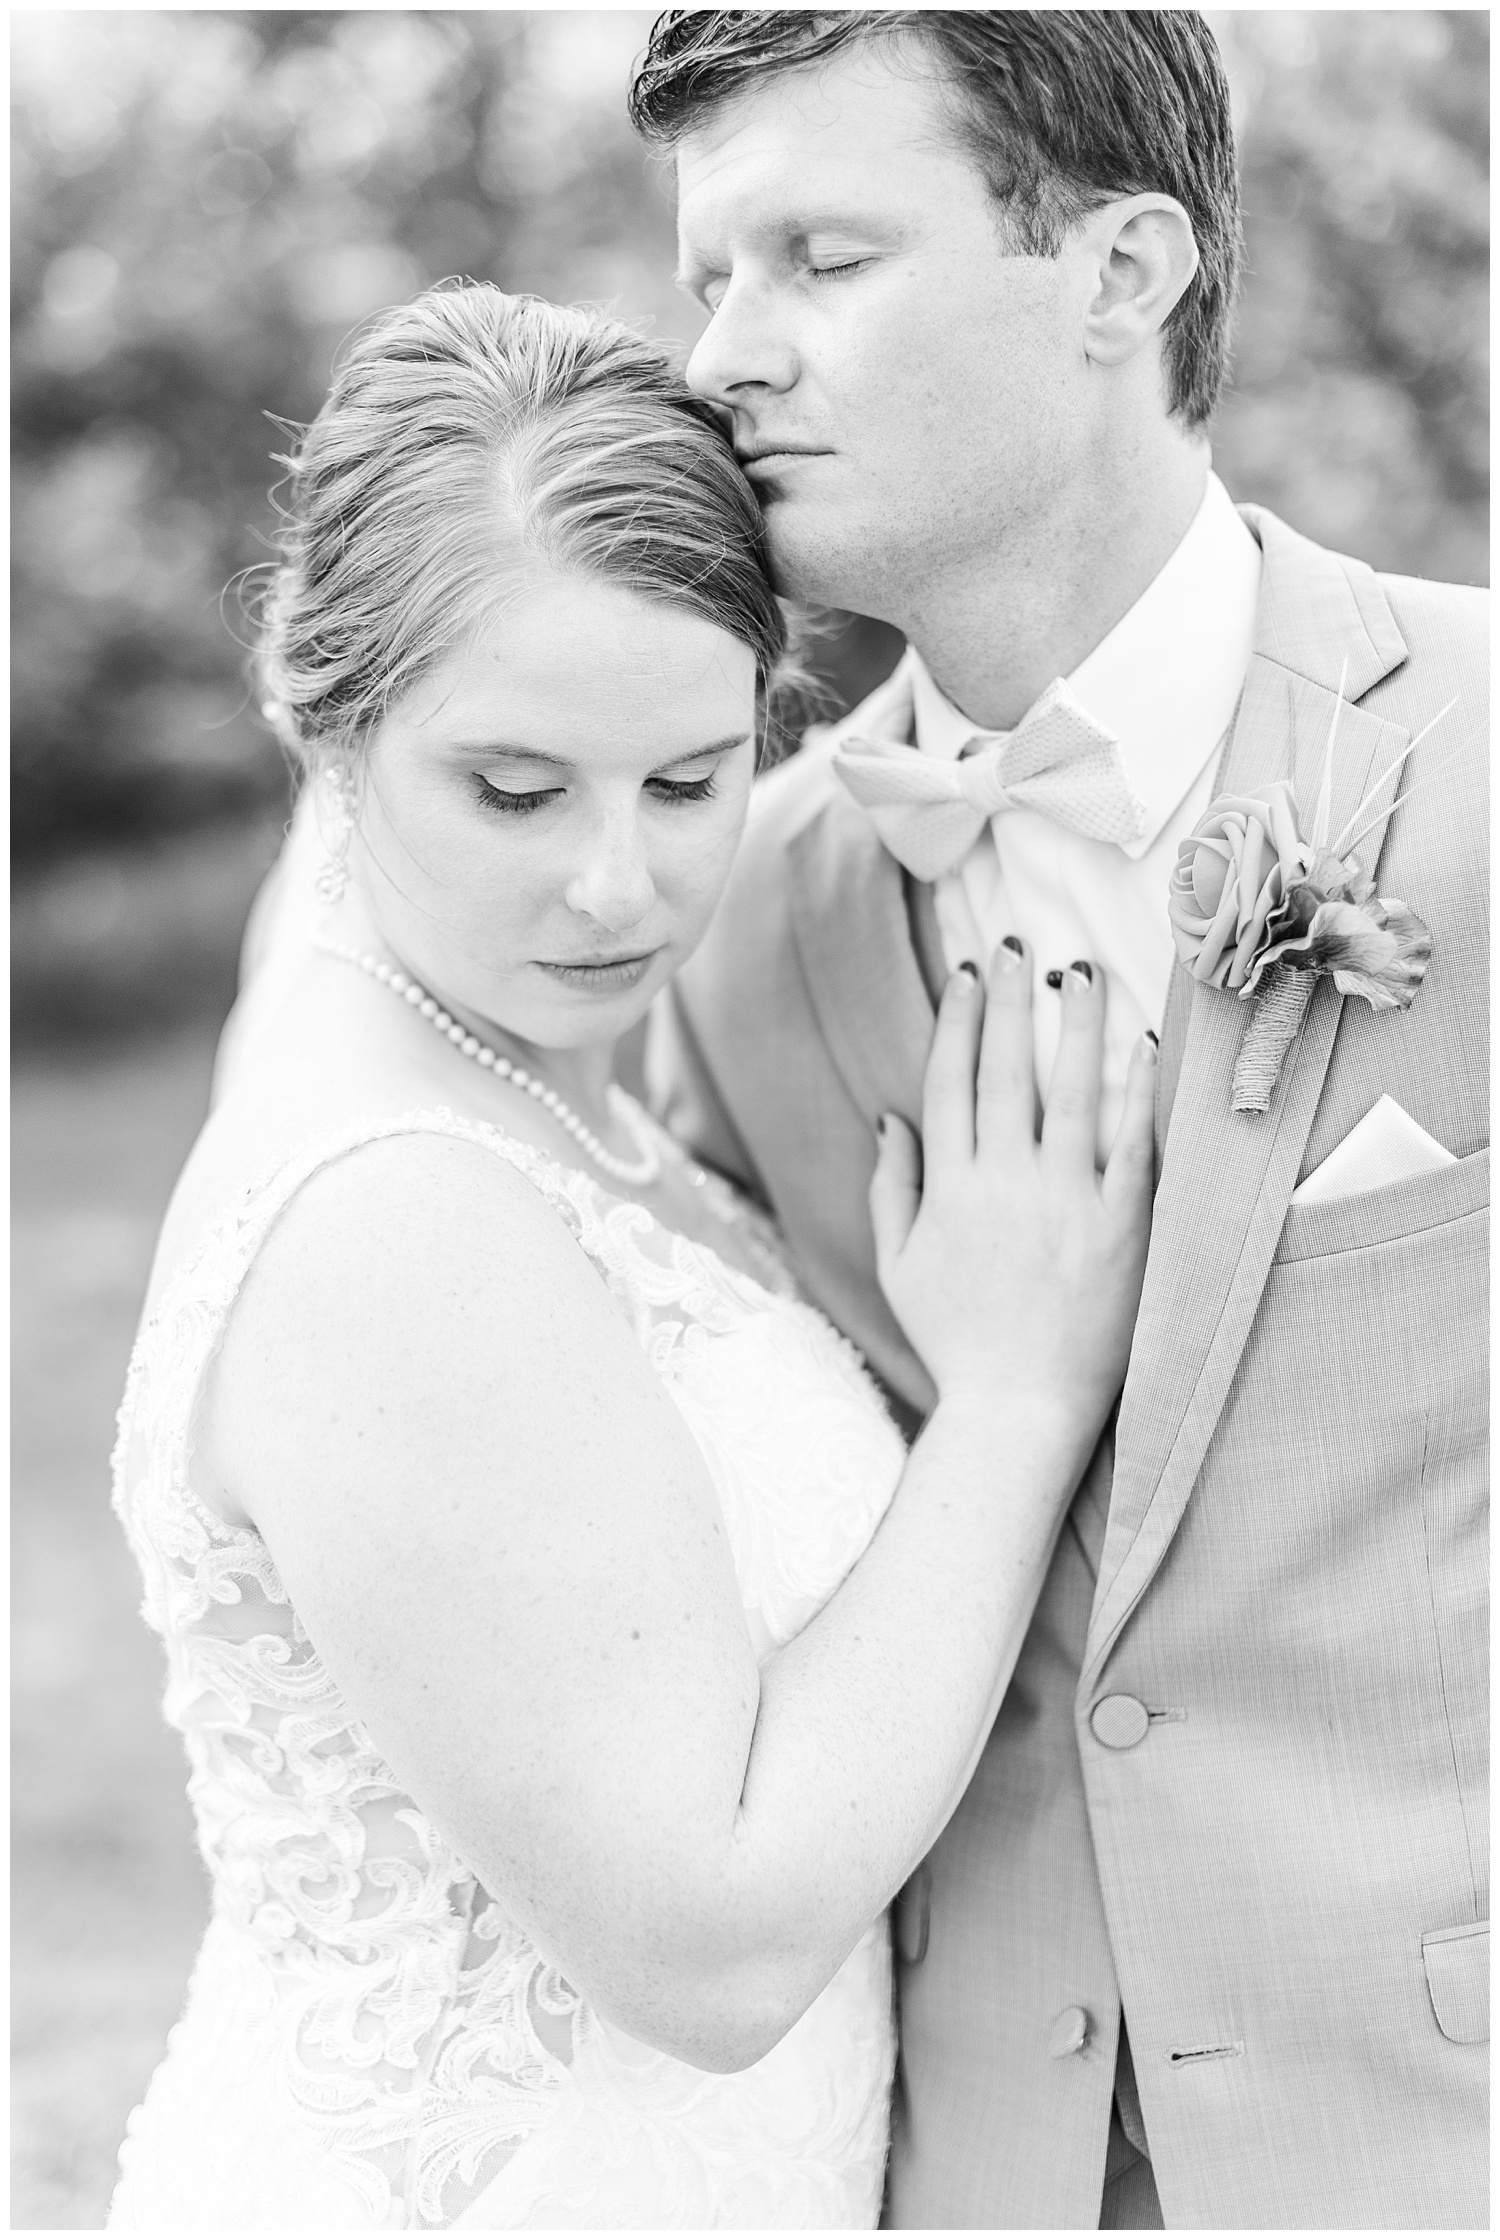 Chris and Hannah embrace each other on their wedding day in Spirit Lake Iowa | CB Studio